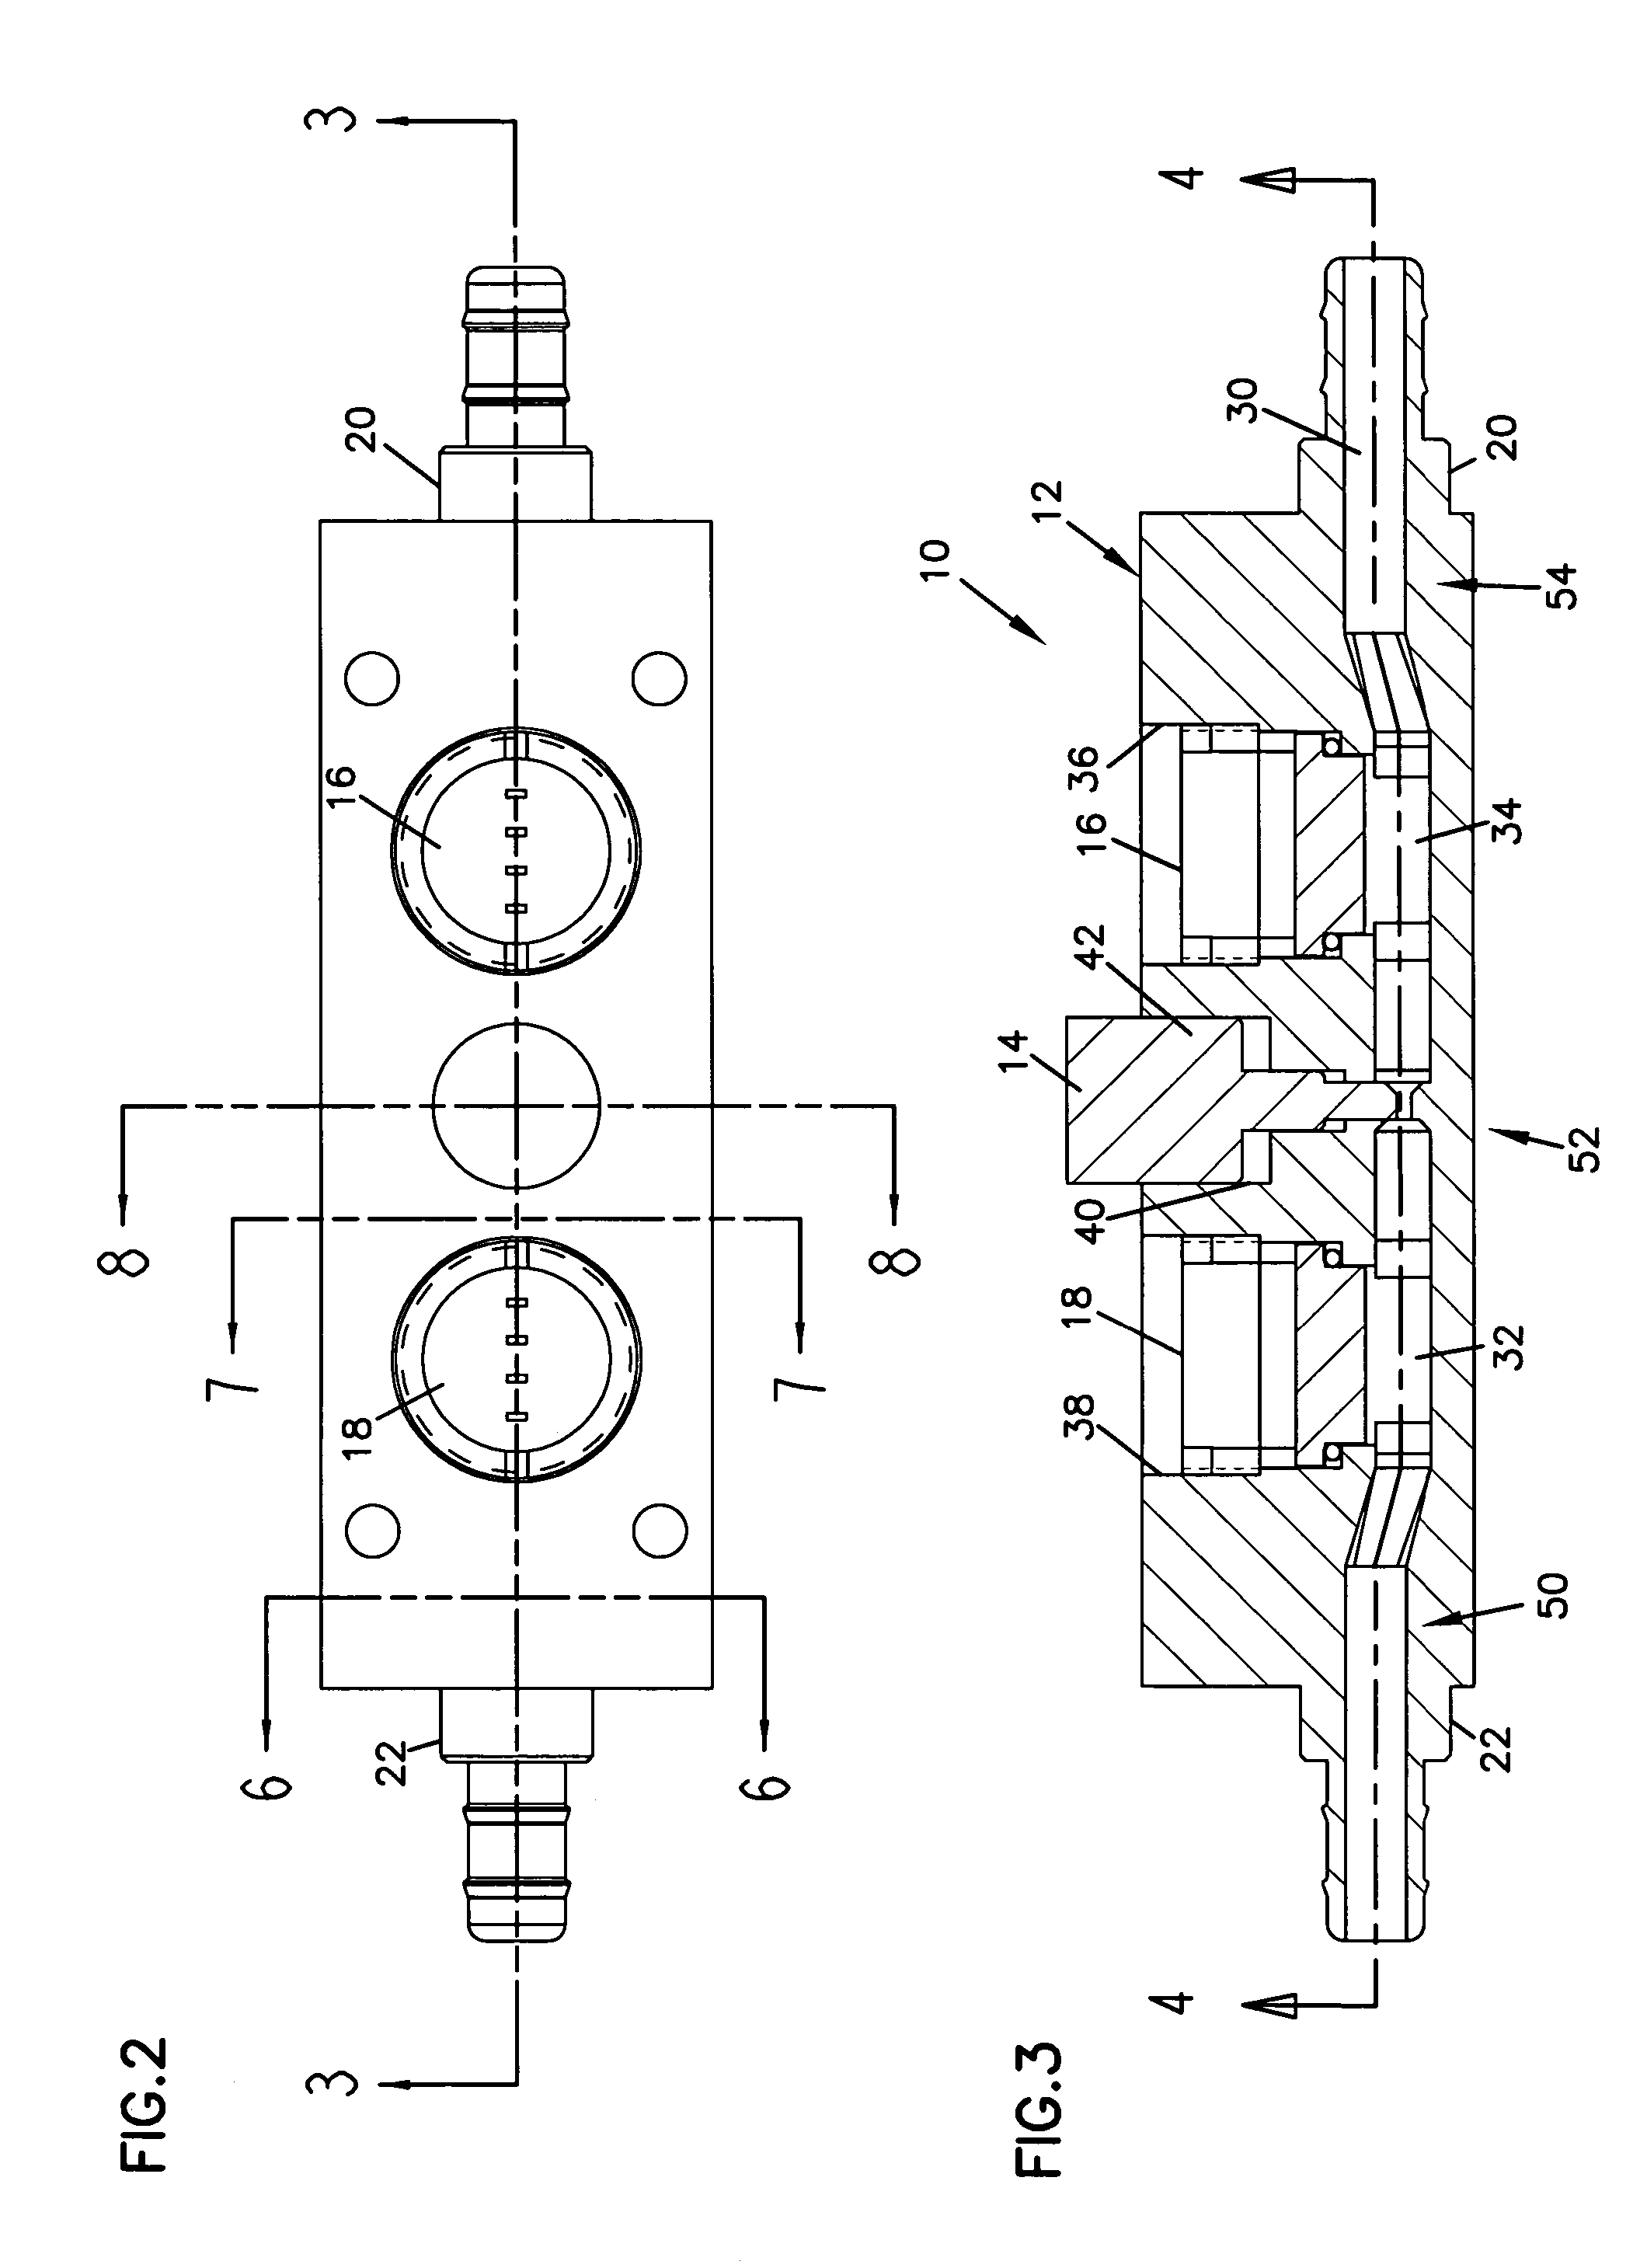 Apparatus for controlling and metering fluid flow